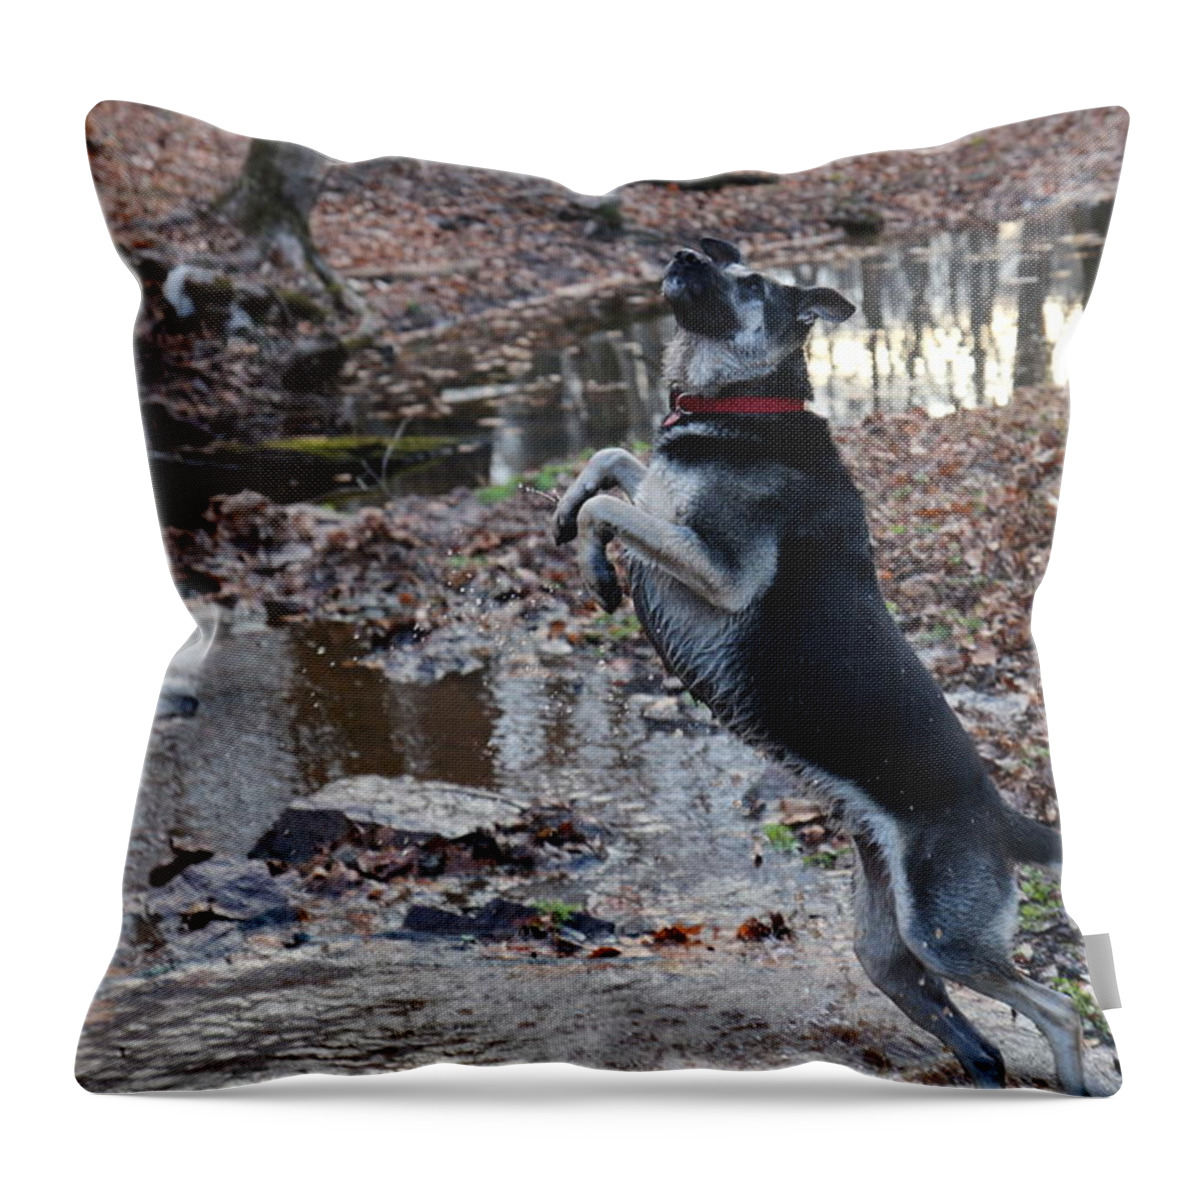 German Throw Pillow featuring the photograph Throwing Stones by David Rucker